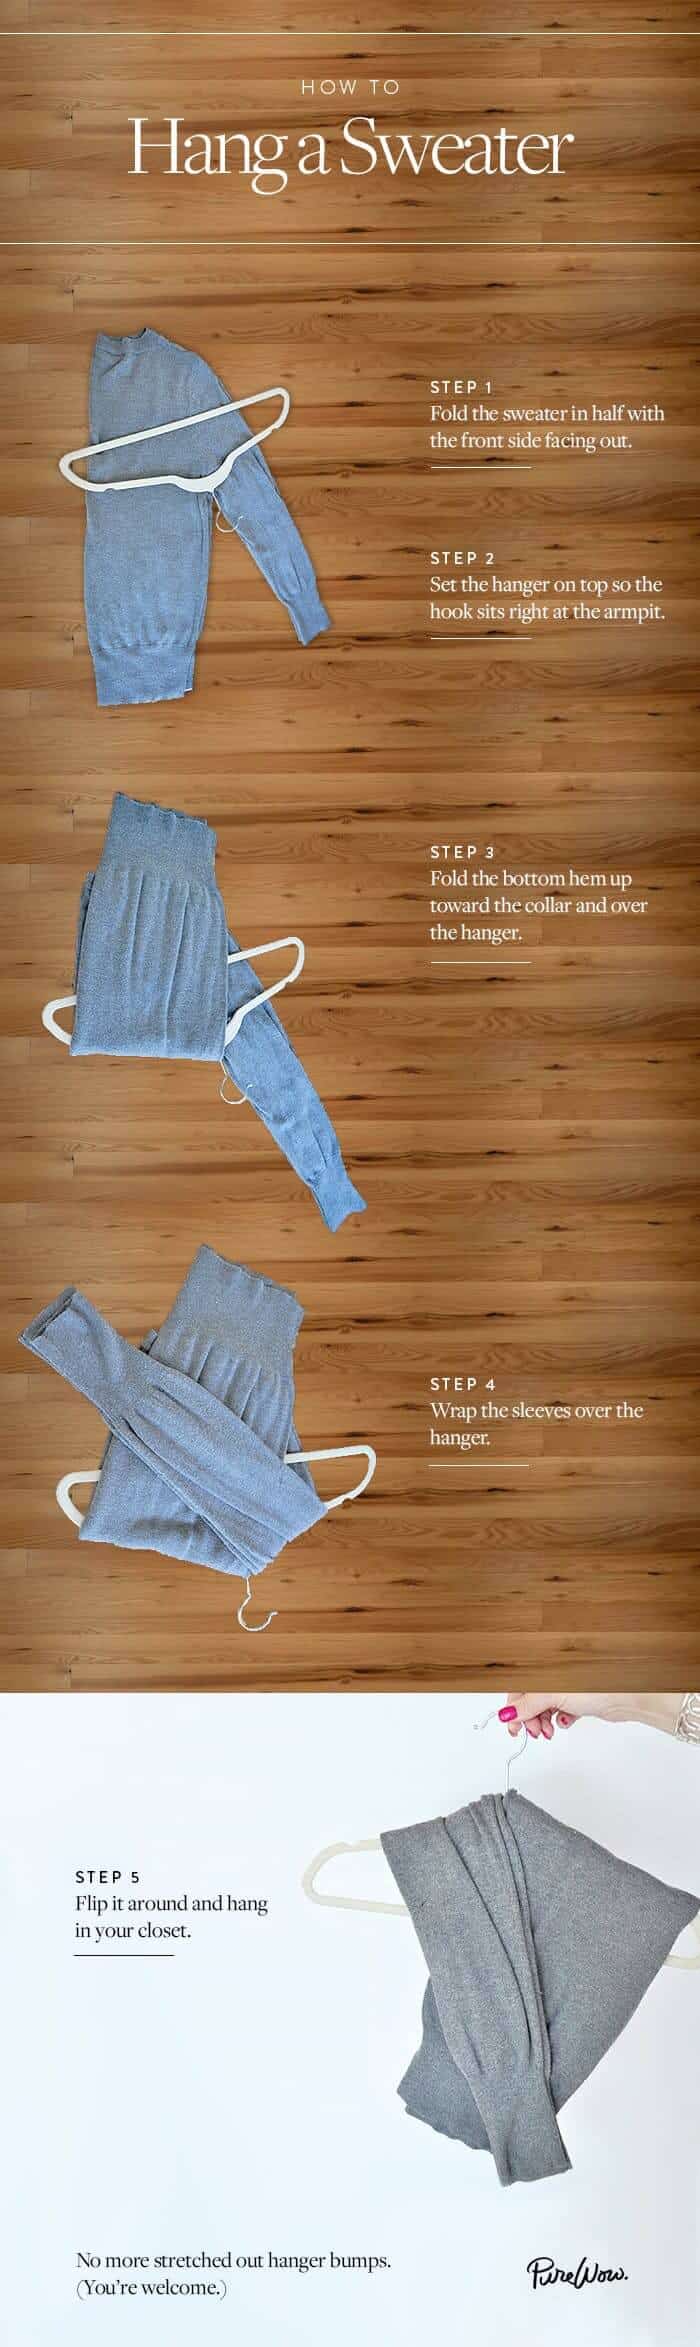 How to Hang a Sweater by Pure Wow